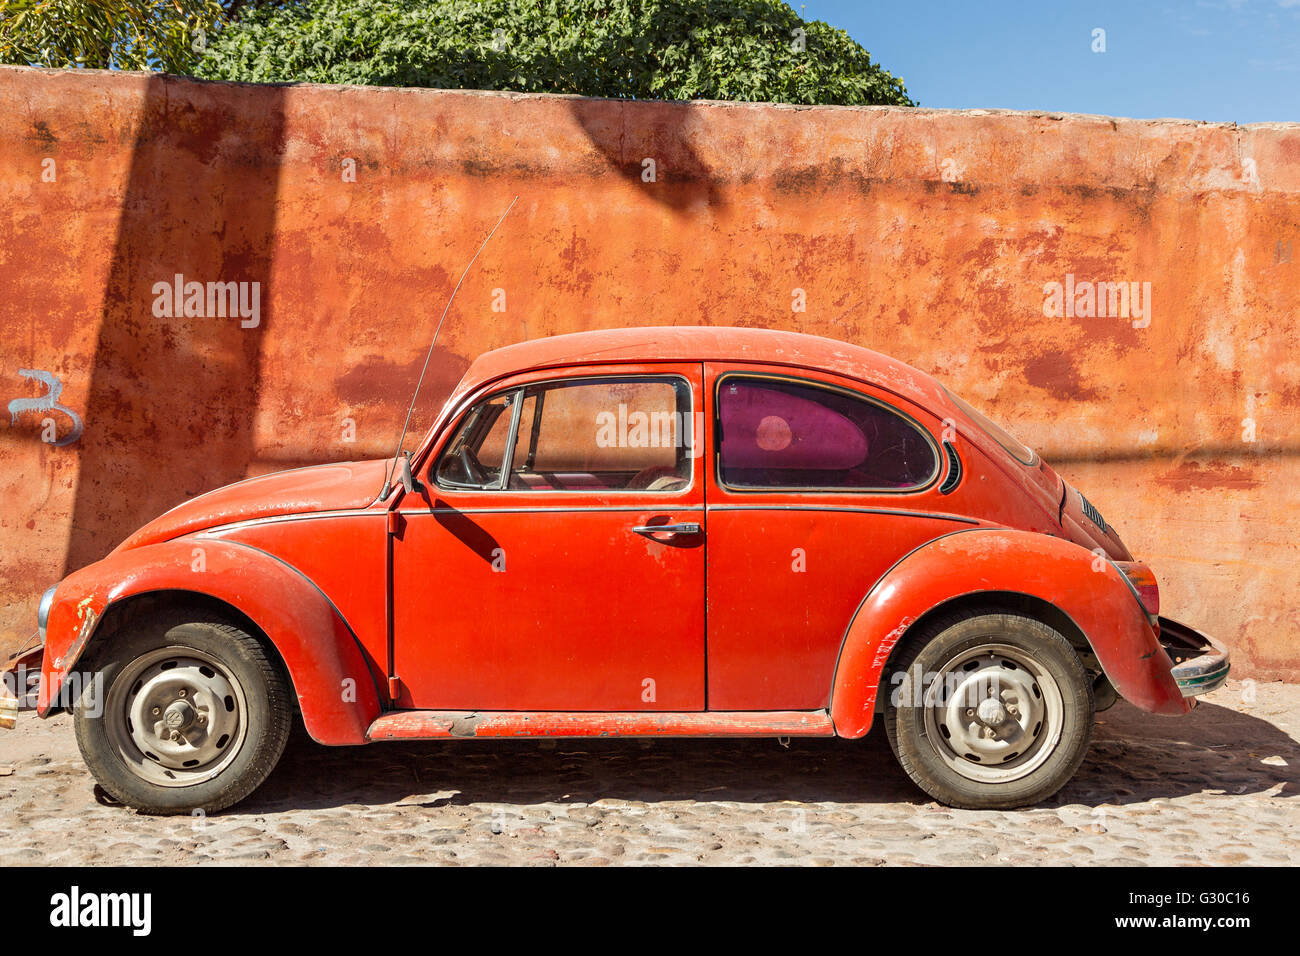 An old red Volkswagen Beetle car parked against a red wall in the historic center of San Miguel de Allende, Mexico. Stock Photo